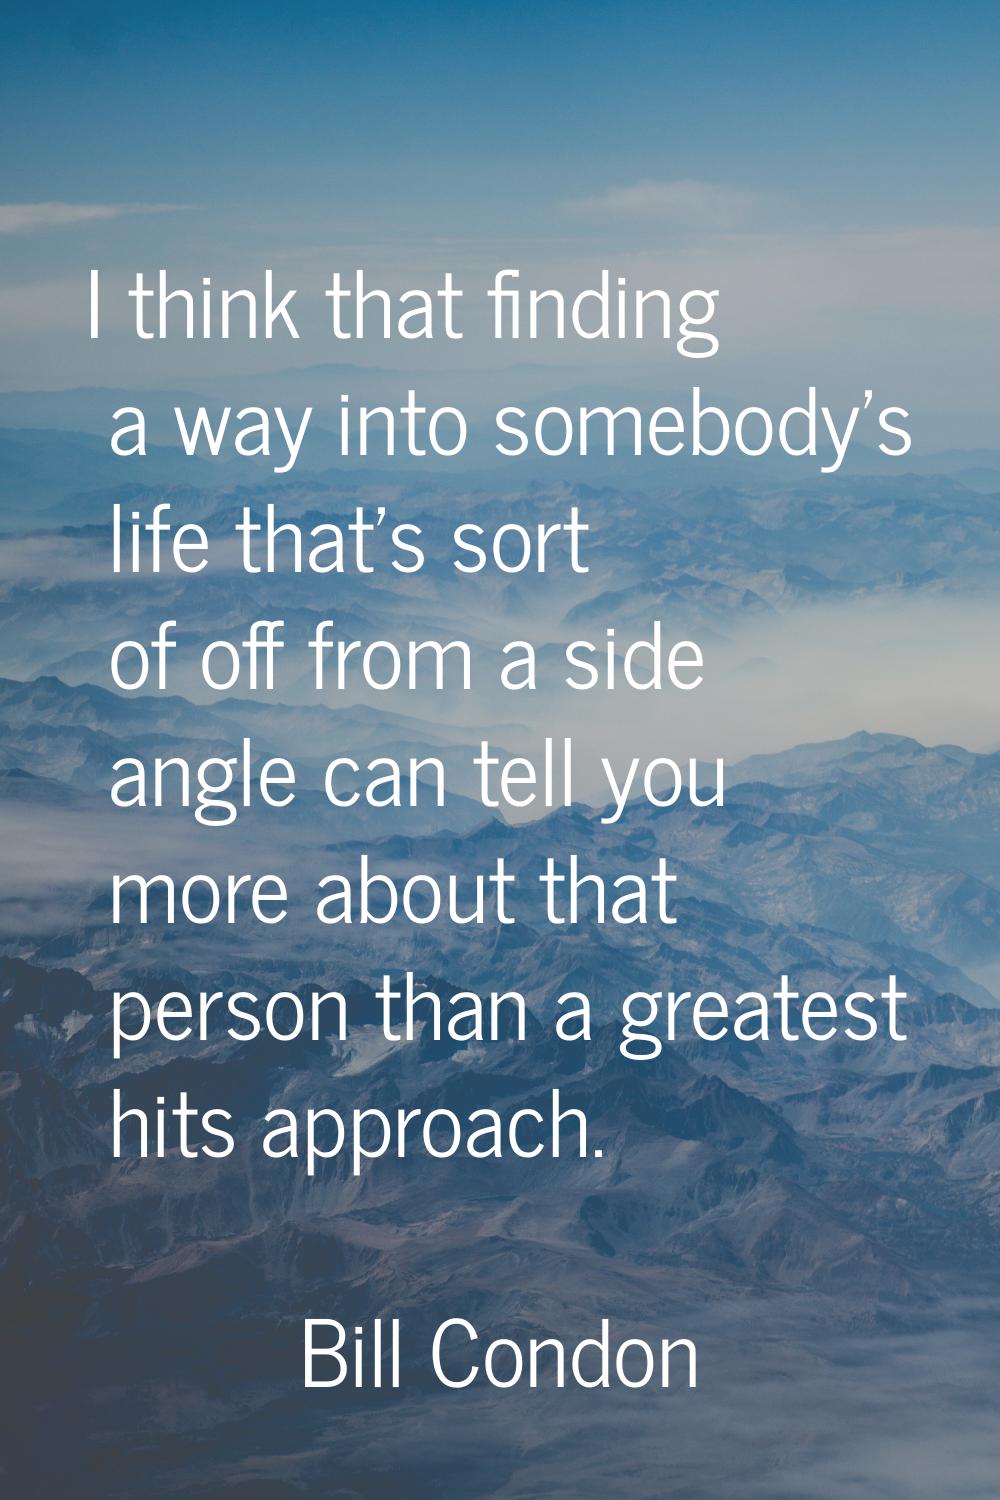 I think that finding a way into somebody's life that's sort of off from a side angle can tell you m